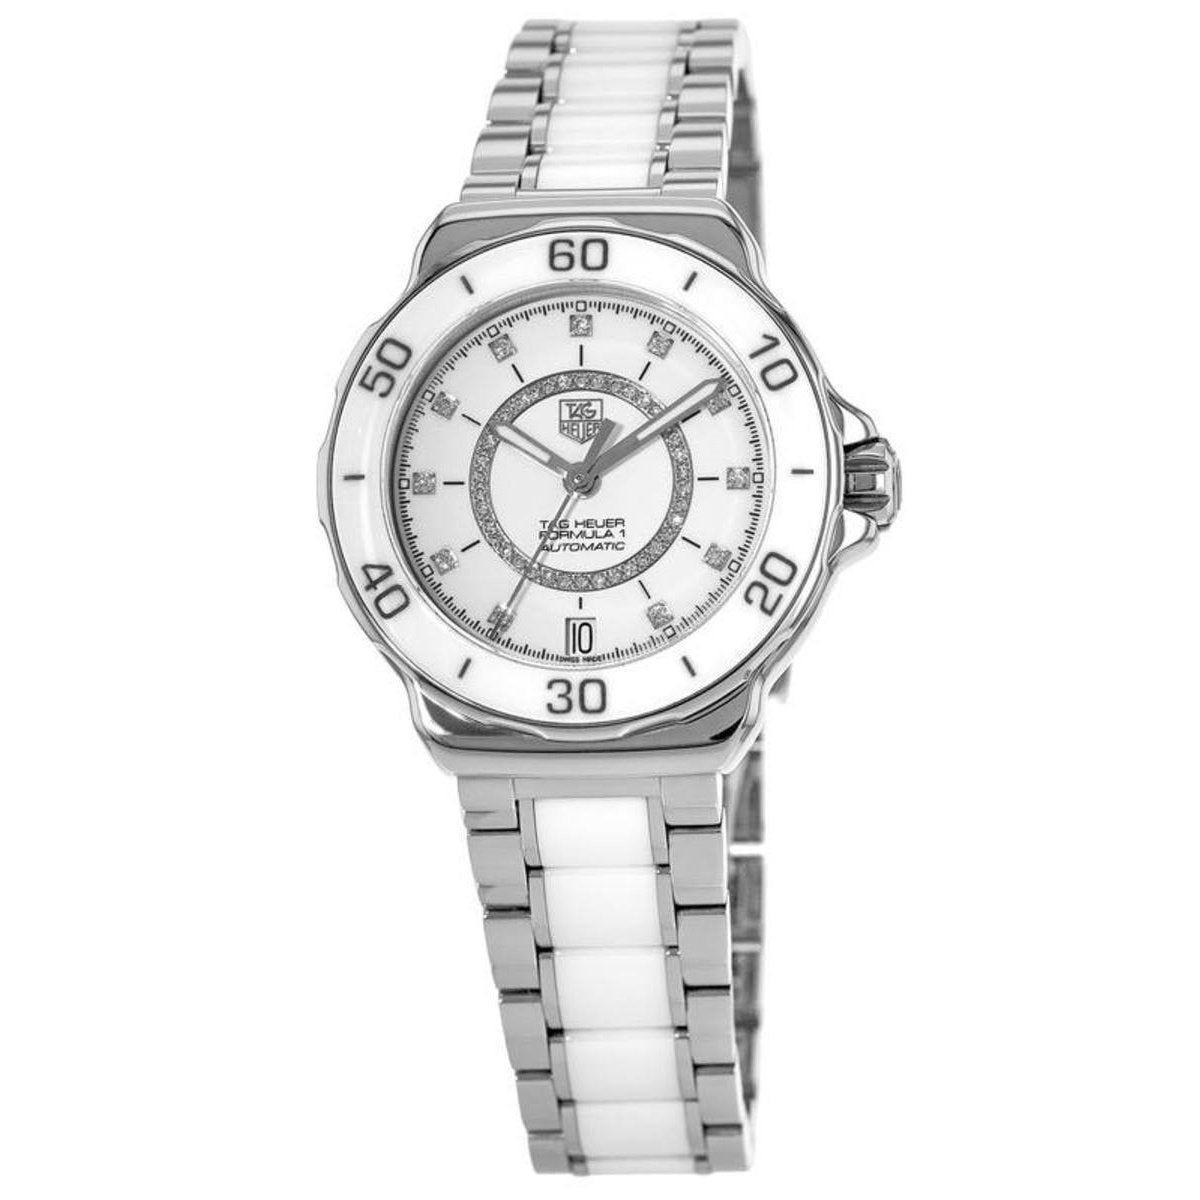 Tag Heuer Men's Formula 1 Automatic Watch